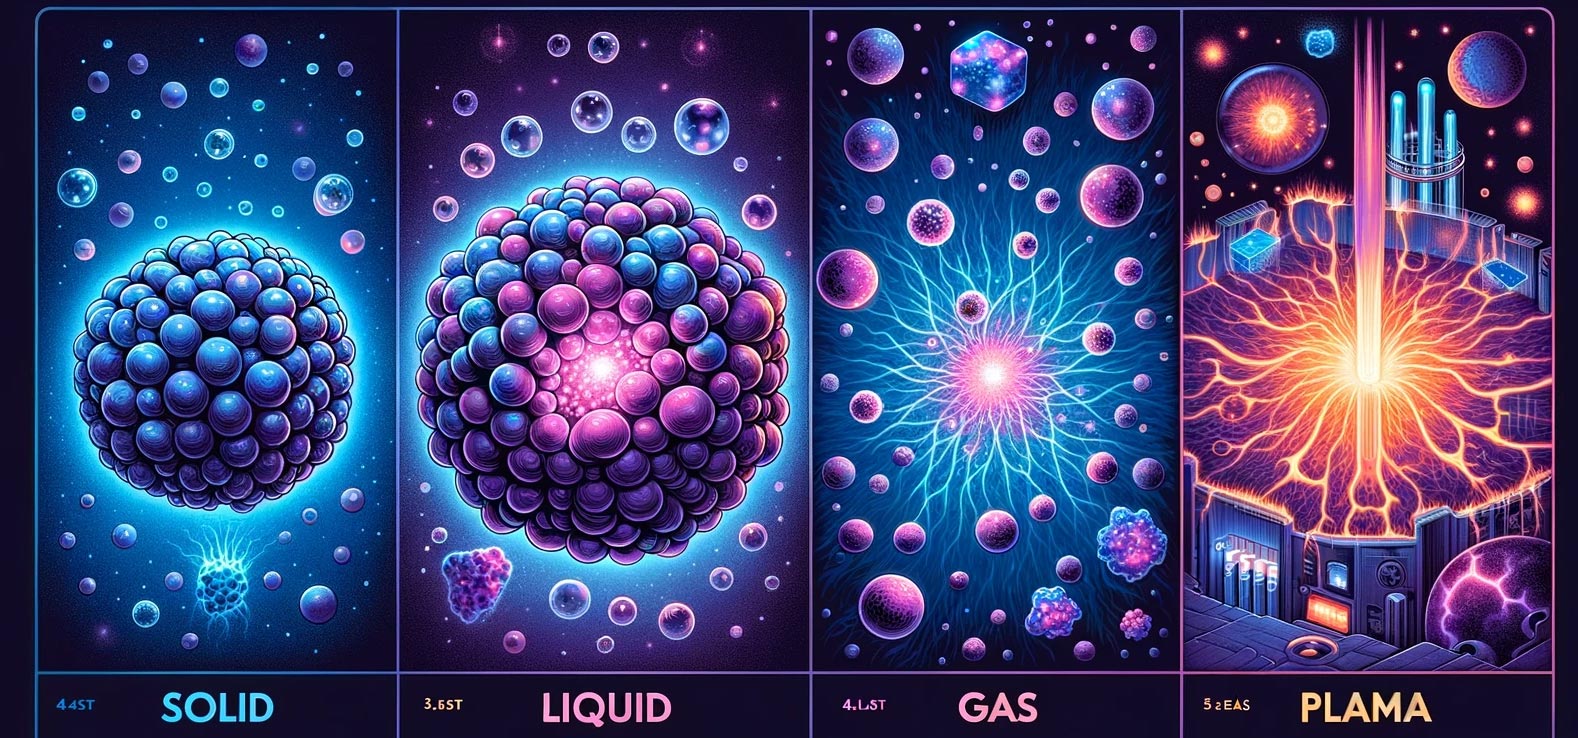 Plasma The Fourth State of Matter Explained